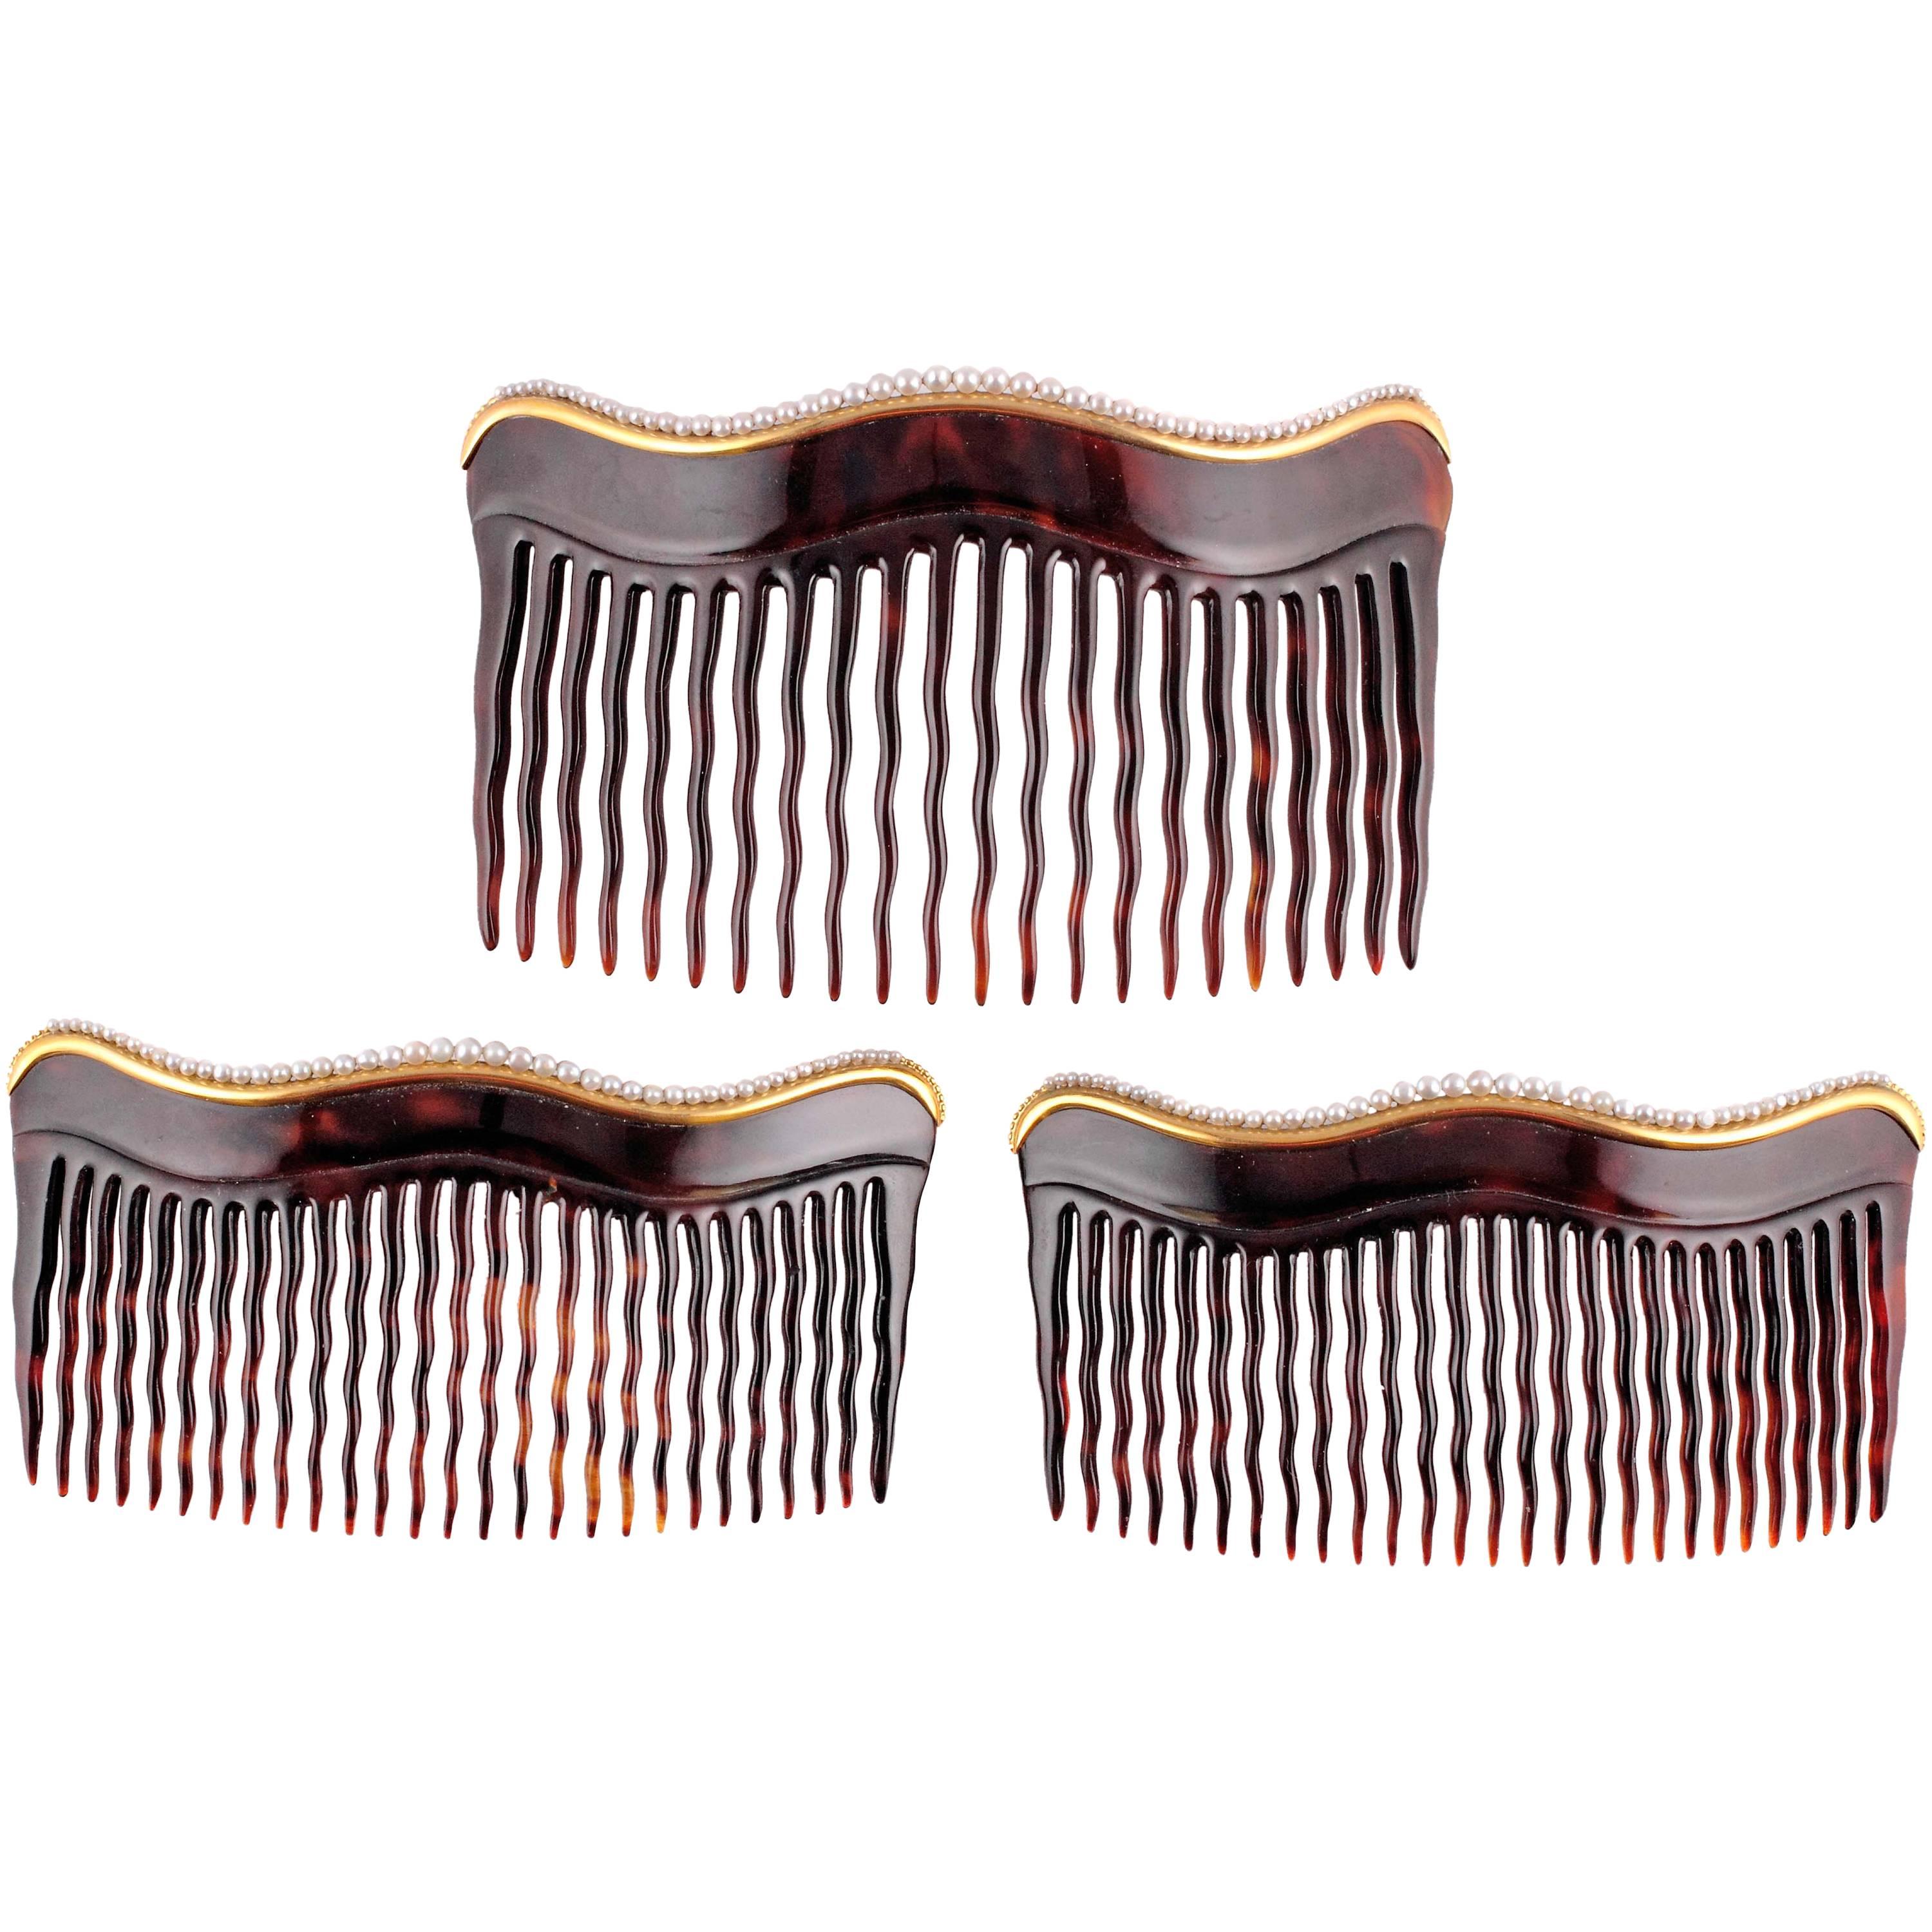 Trio of Edwardian Natural Pearl Tortoiseshell Gold Combs